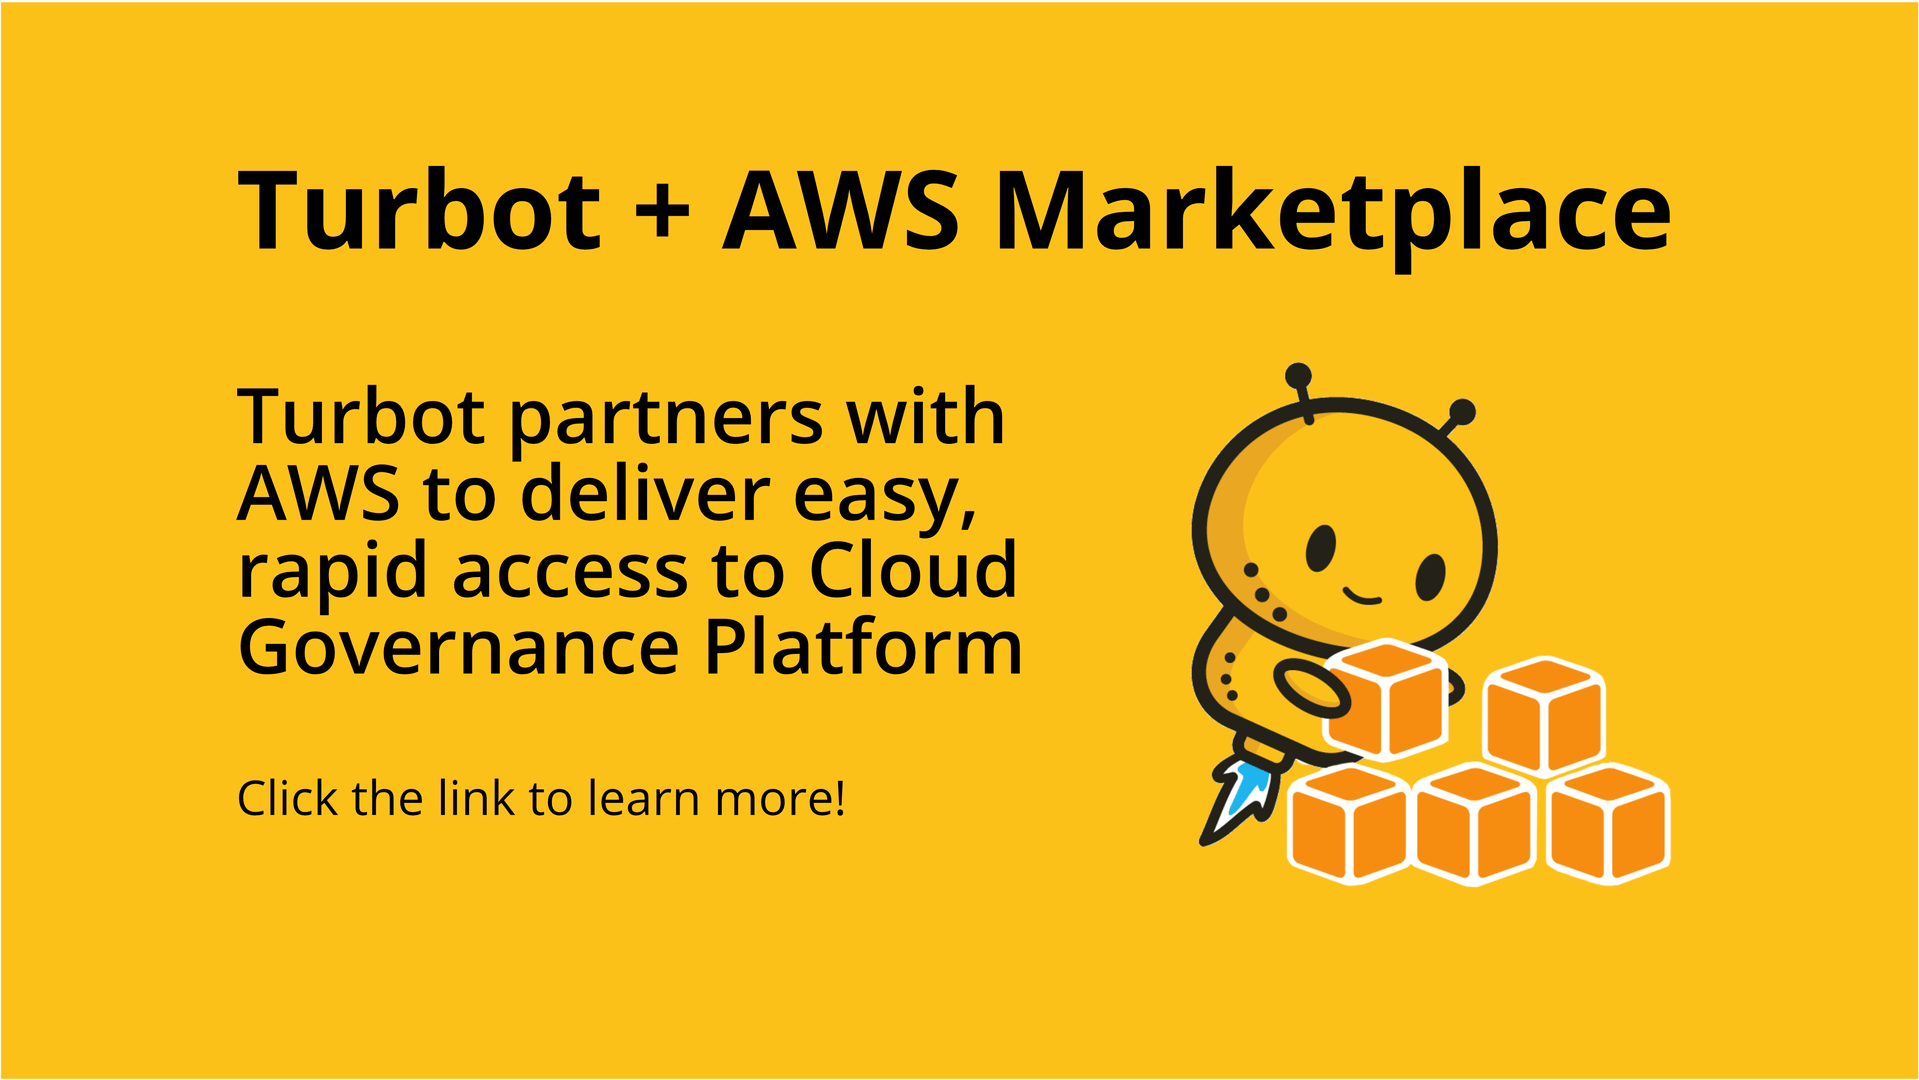 Lowering barriers to cloud governance via AWS Marketplace